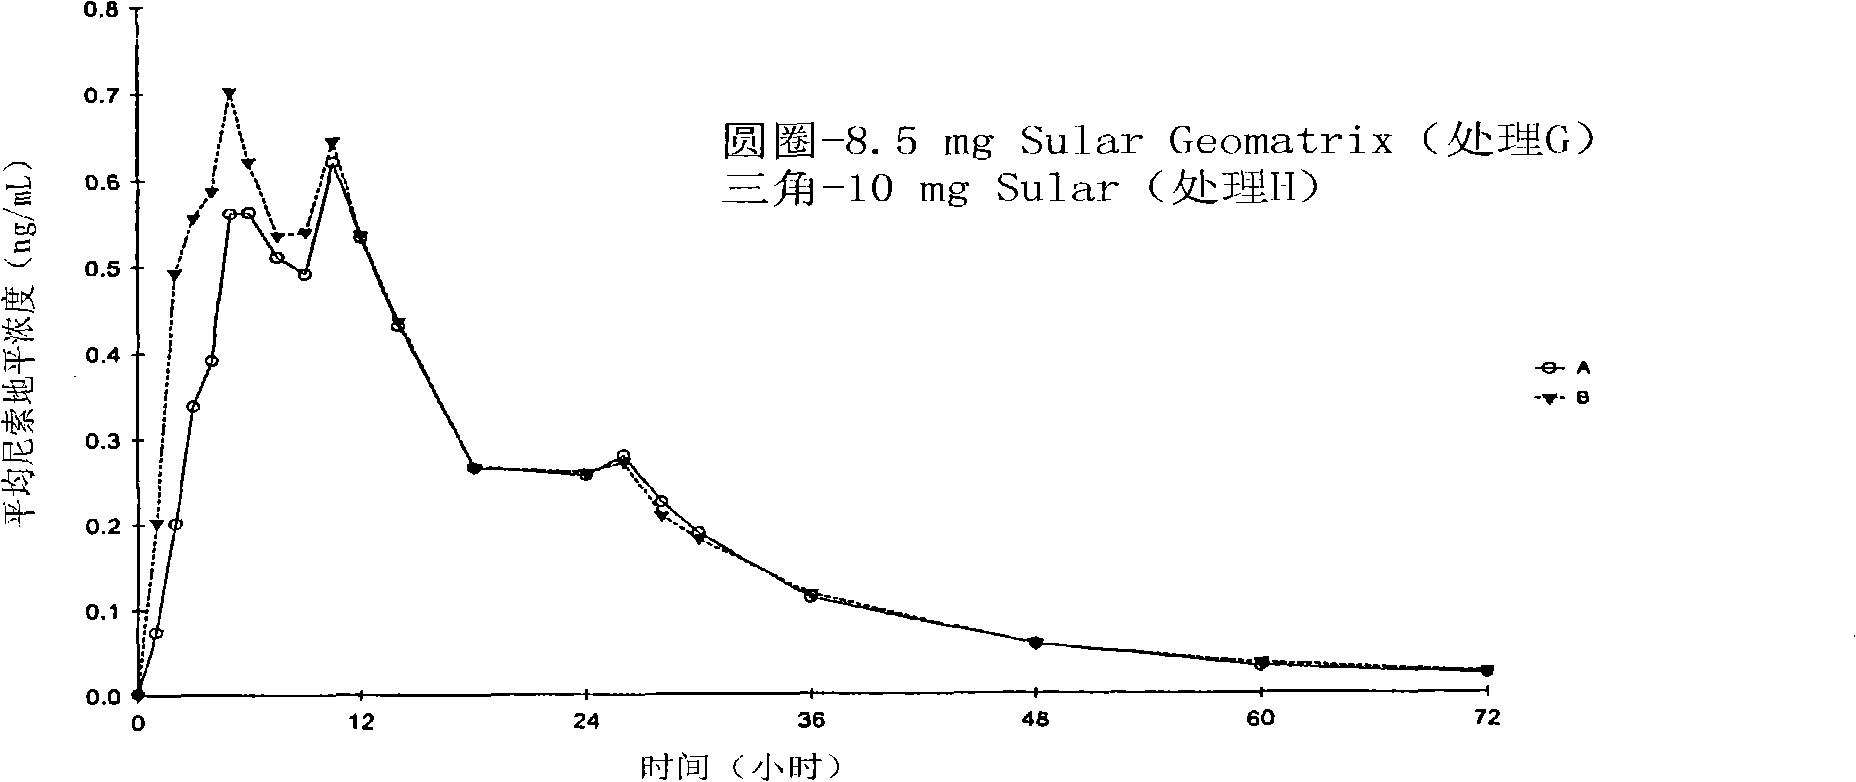 Controlled release solid oral dosage formulations comprising nisoldipine